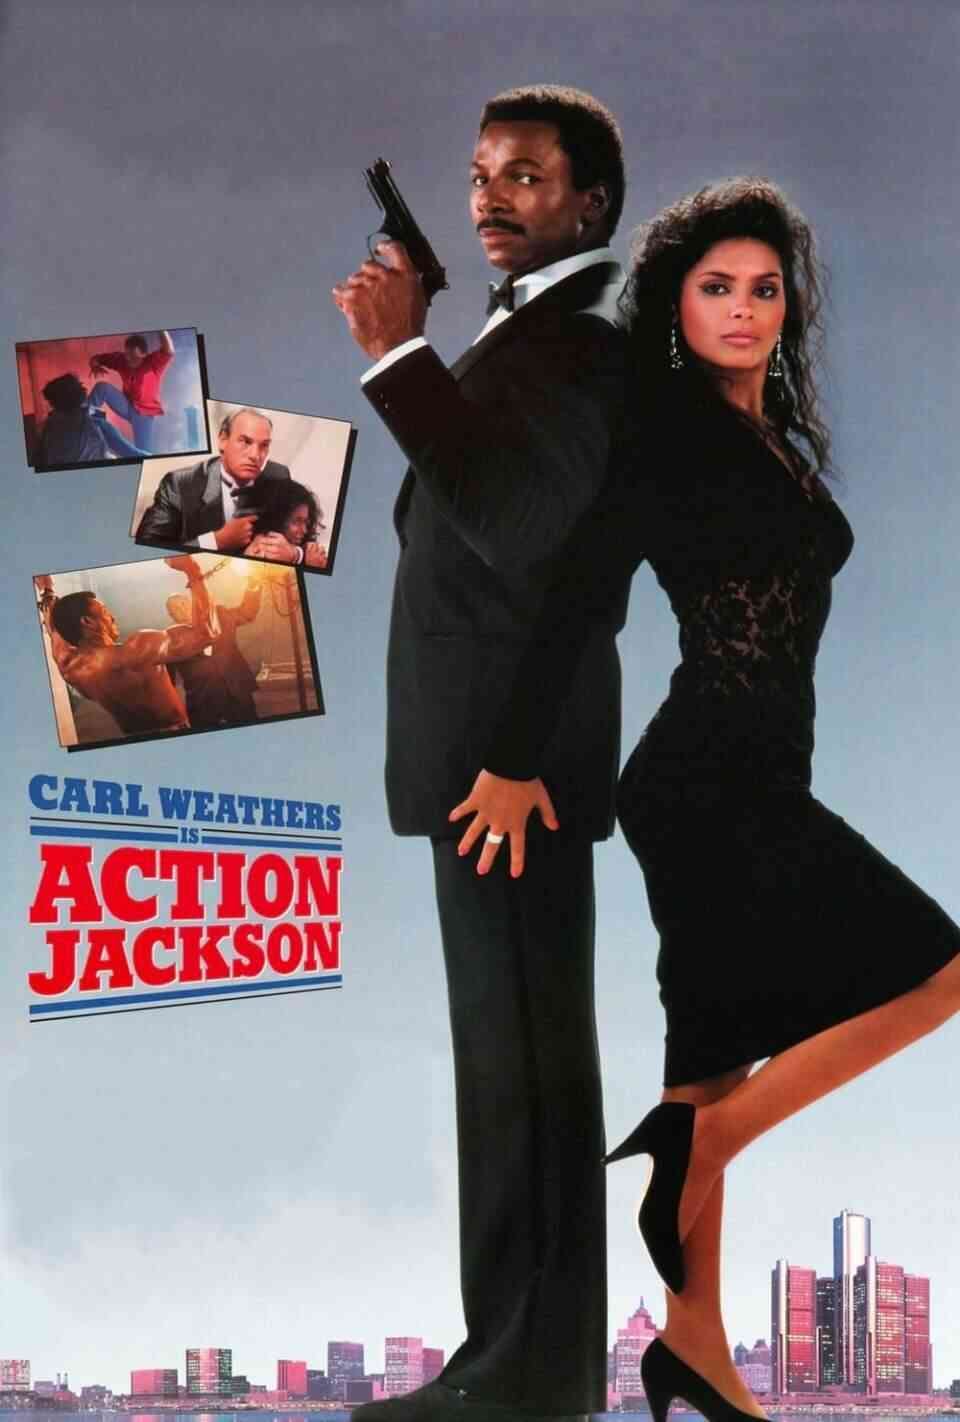 Read Action Jackson screenplay (poster)